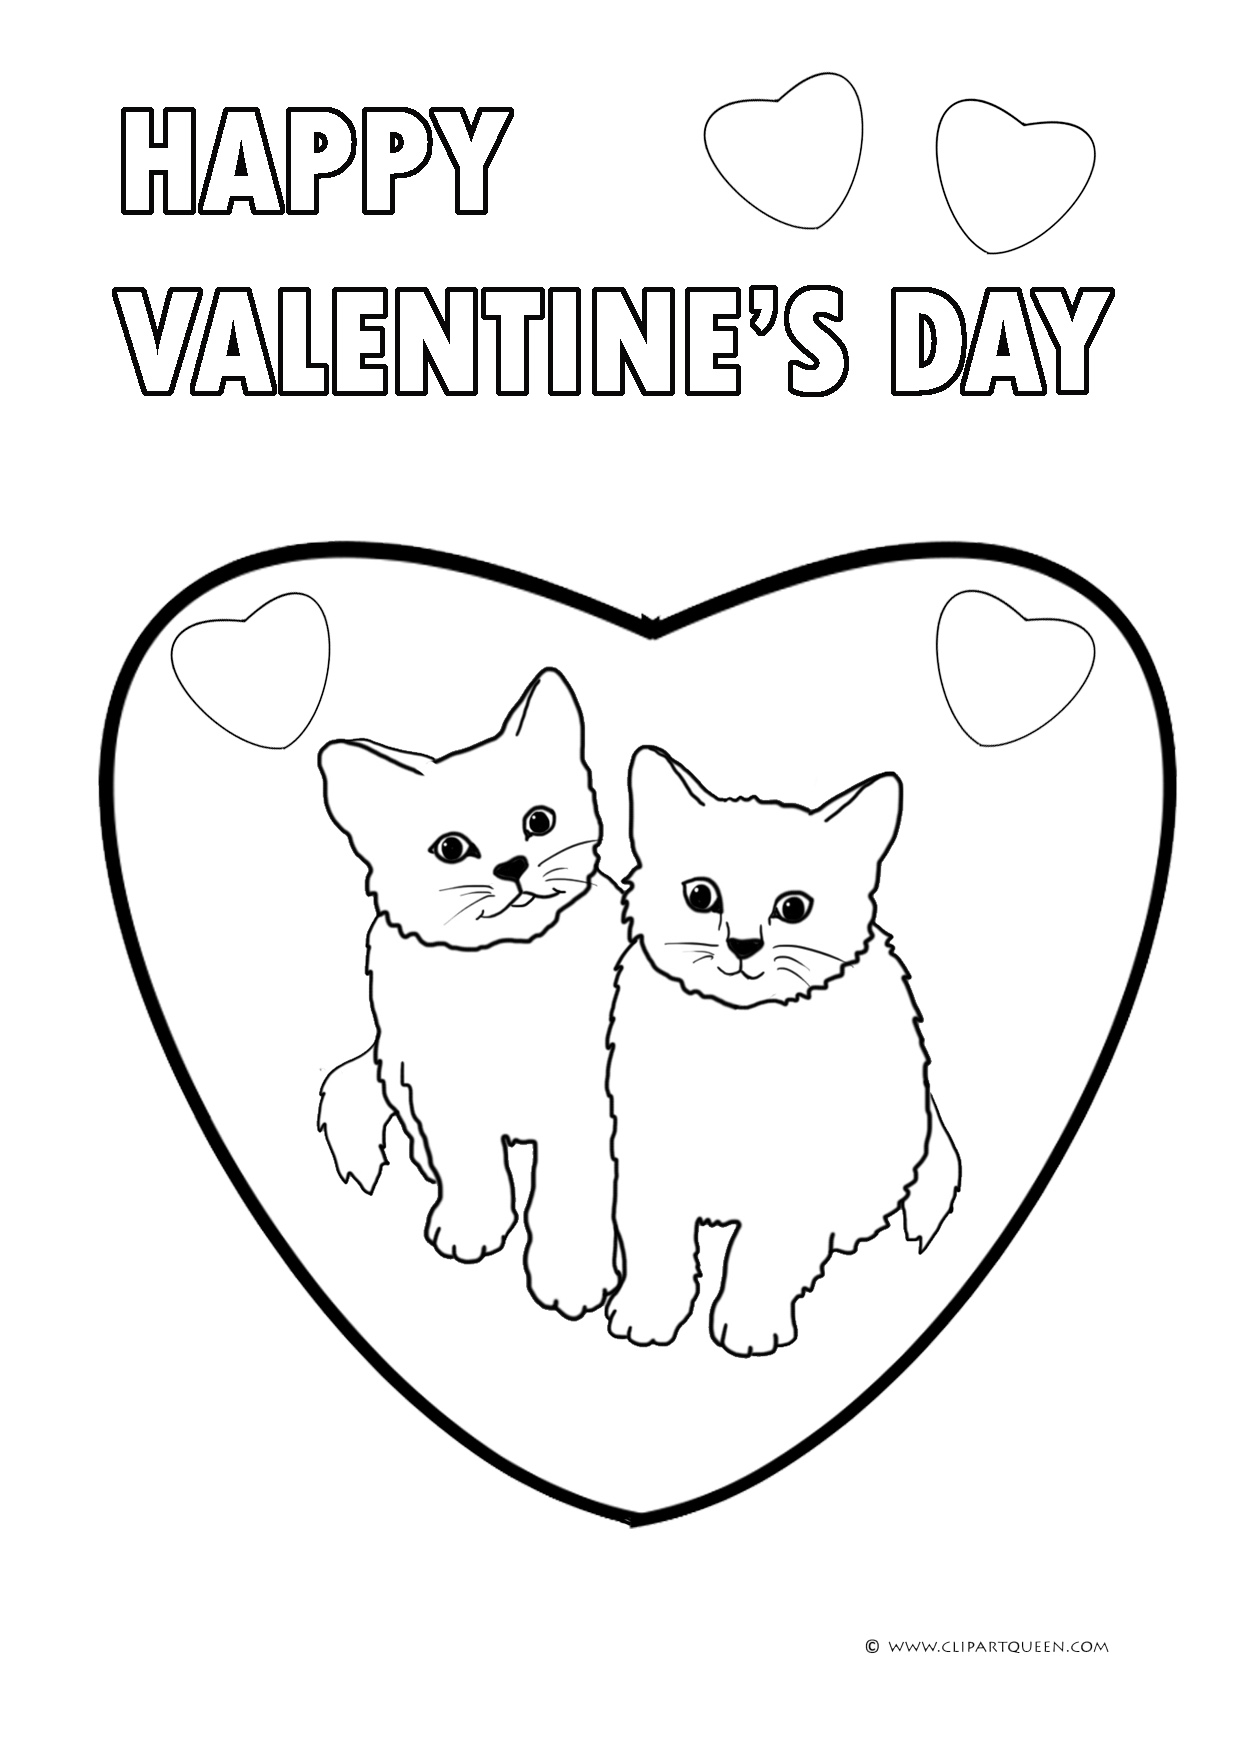 11 Valentine's Day coloring pages